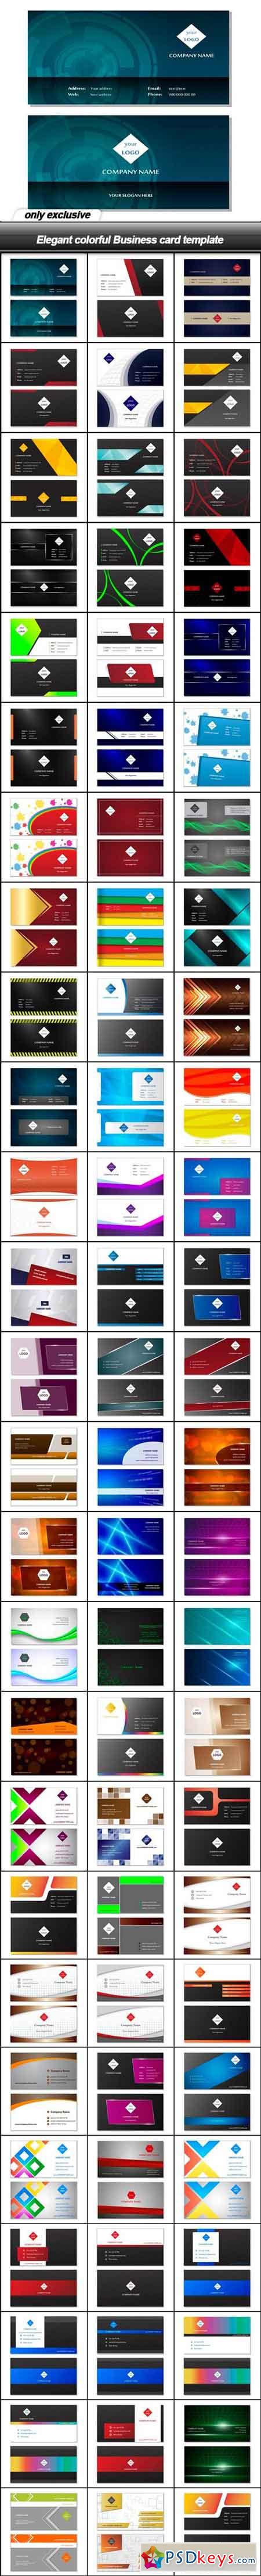 Elegant colorful Business card template -77 EPS